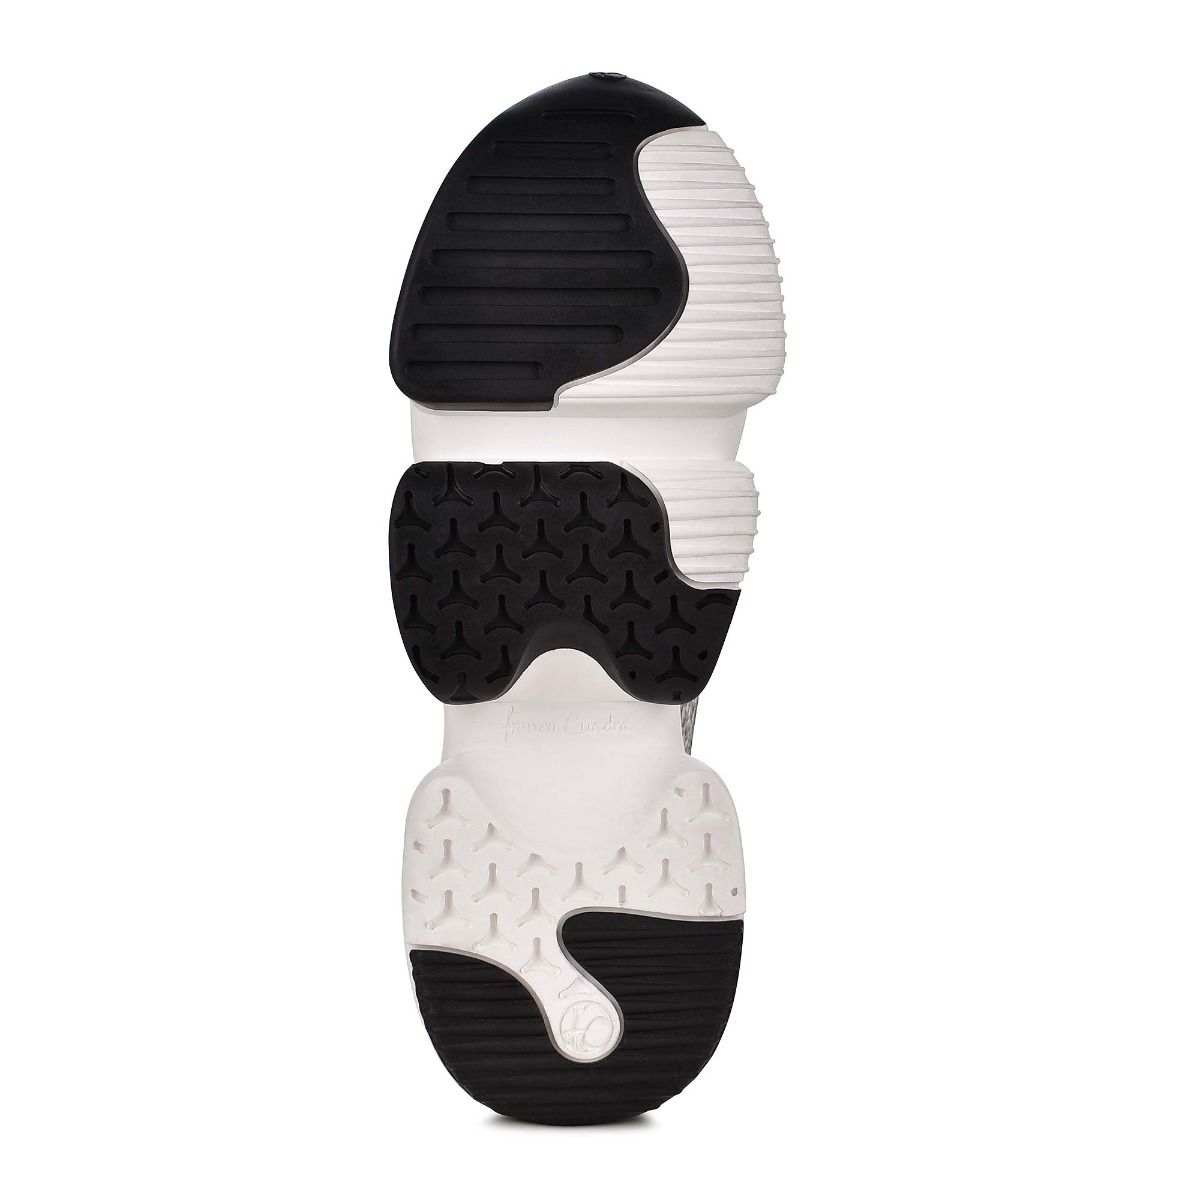 The two color double density sole is the perfect balance of durability and support